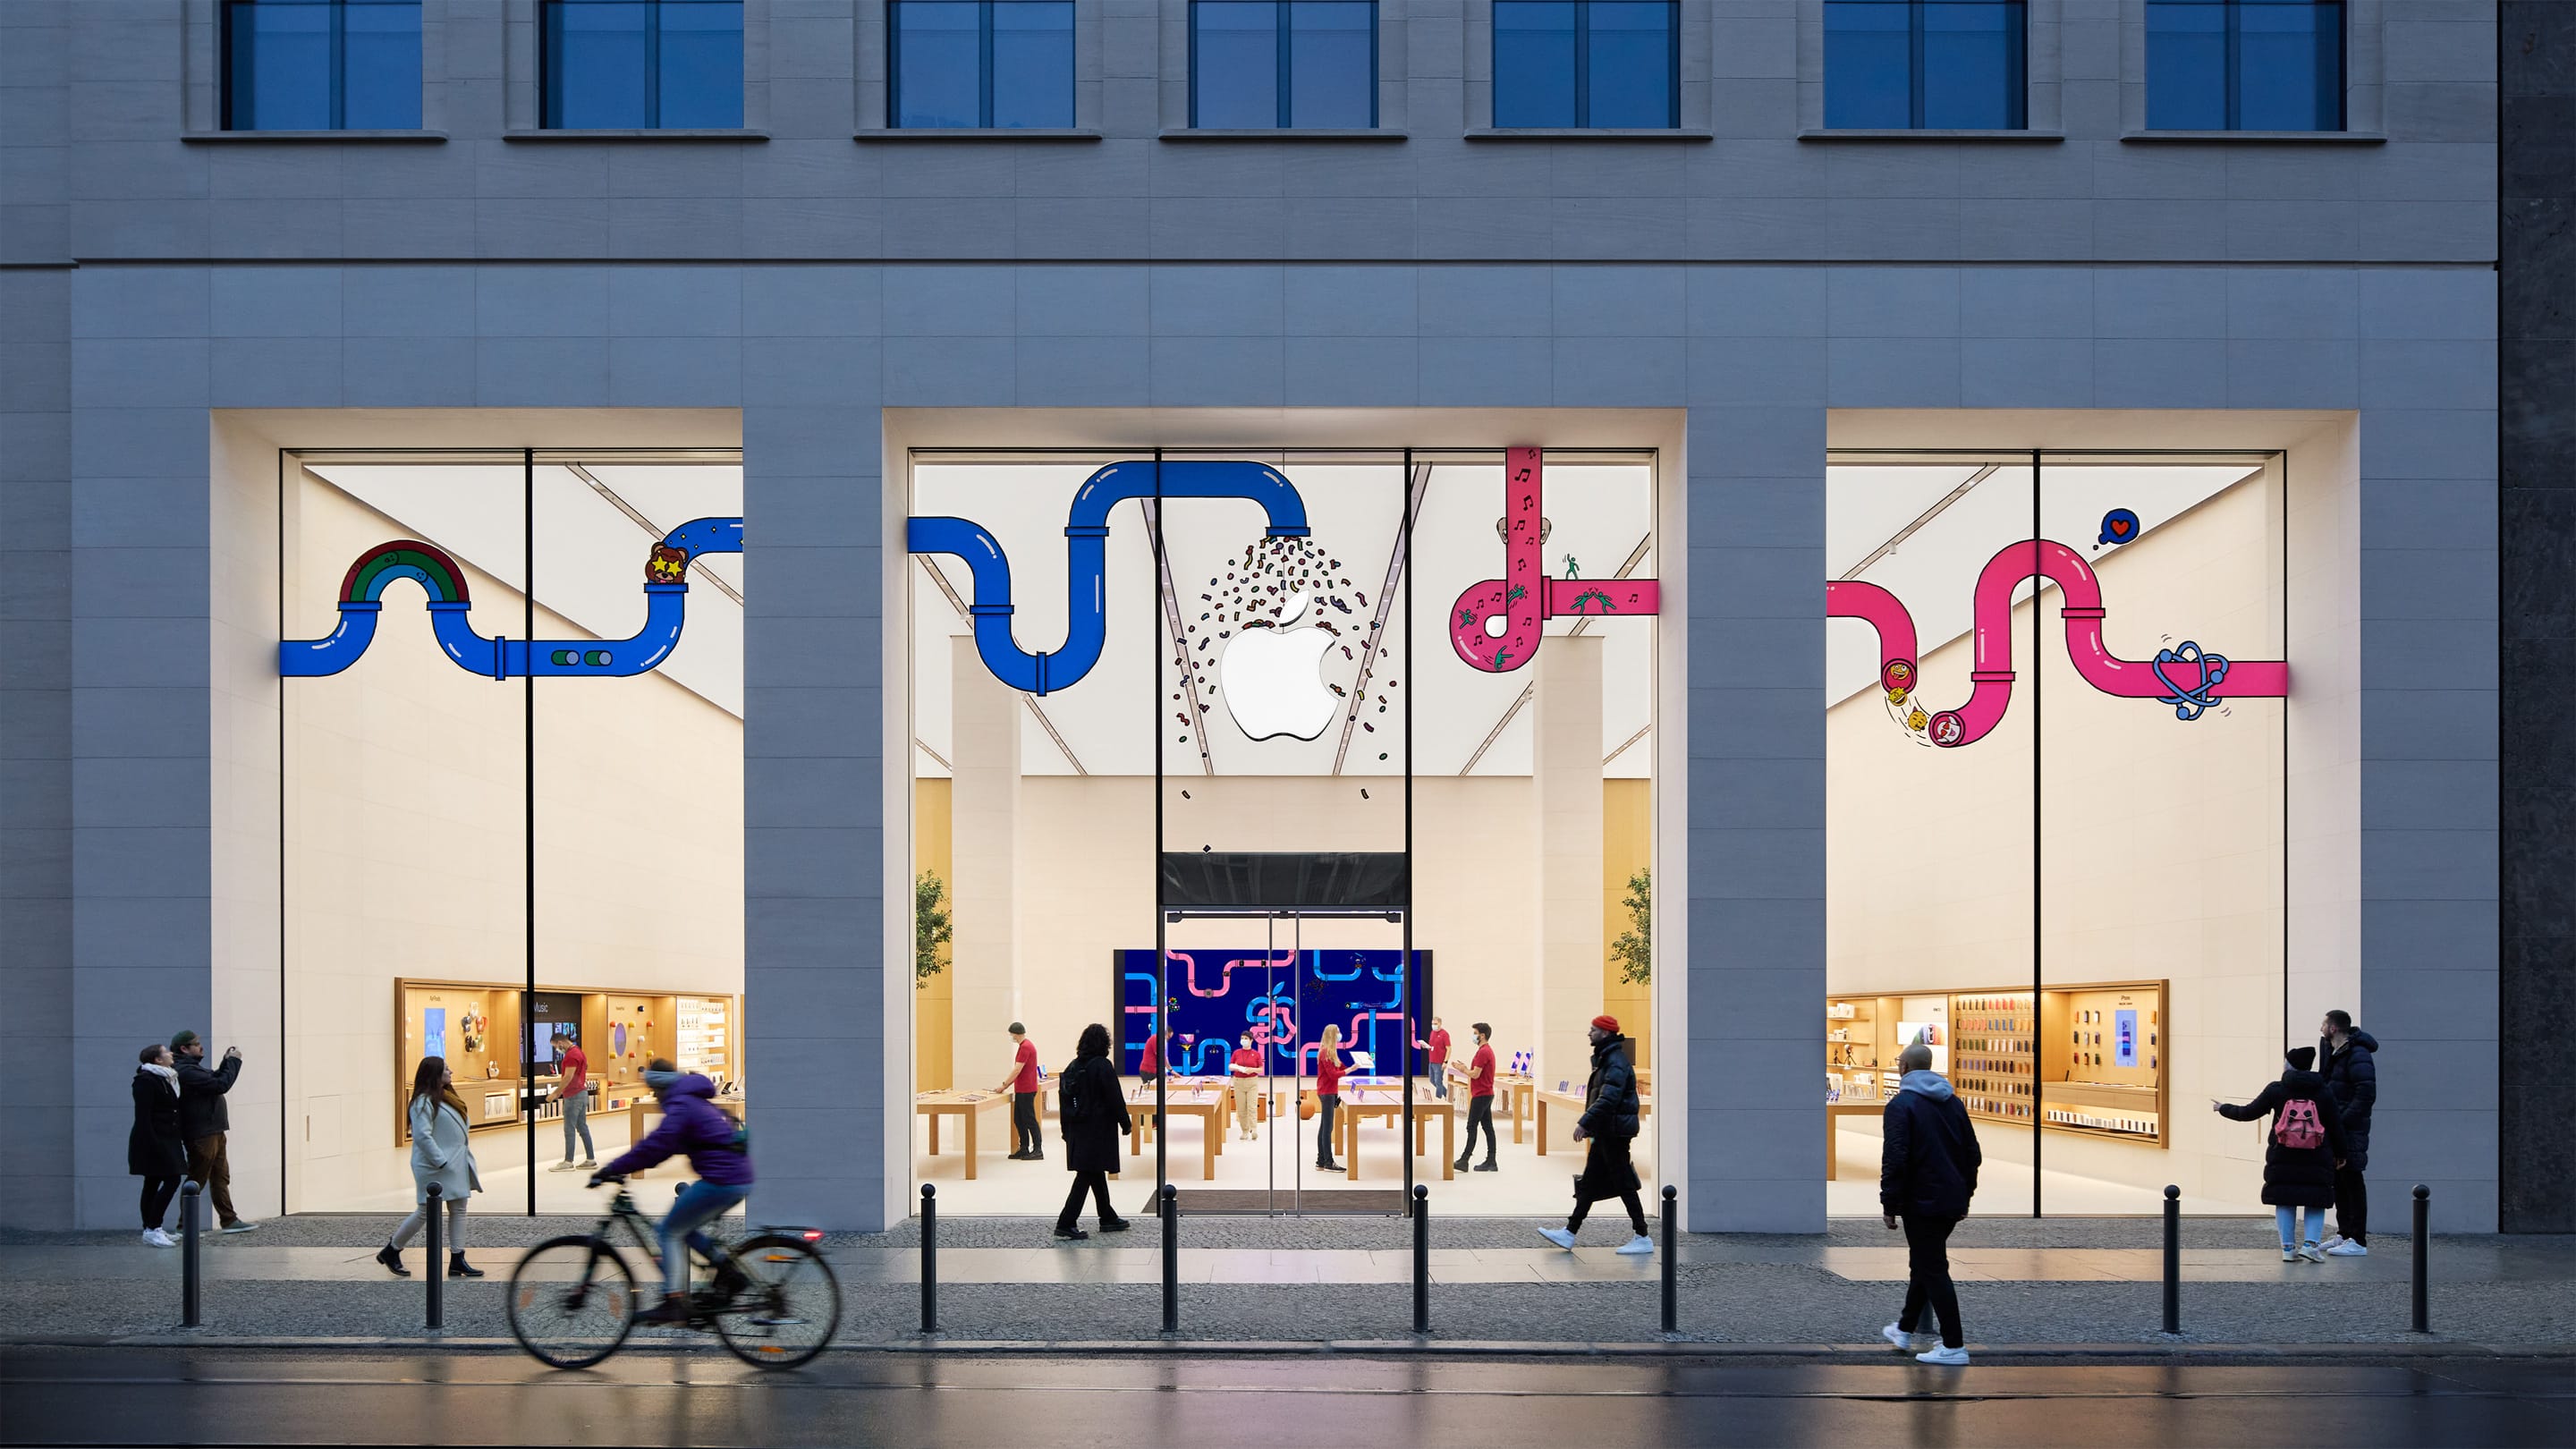 A photograph showing the exterior storefront of Apple's Rosenthaler Straße retail store in Berlin, Germany 